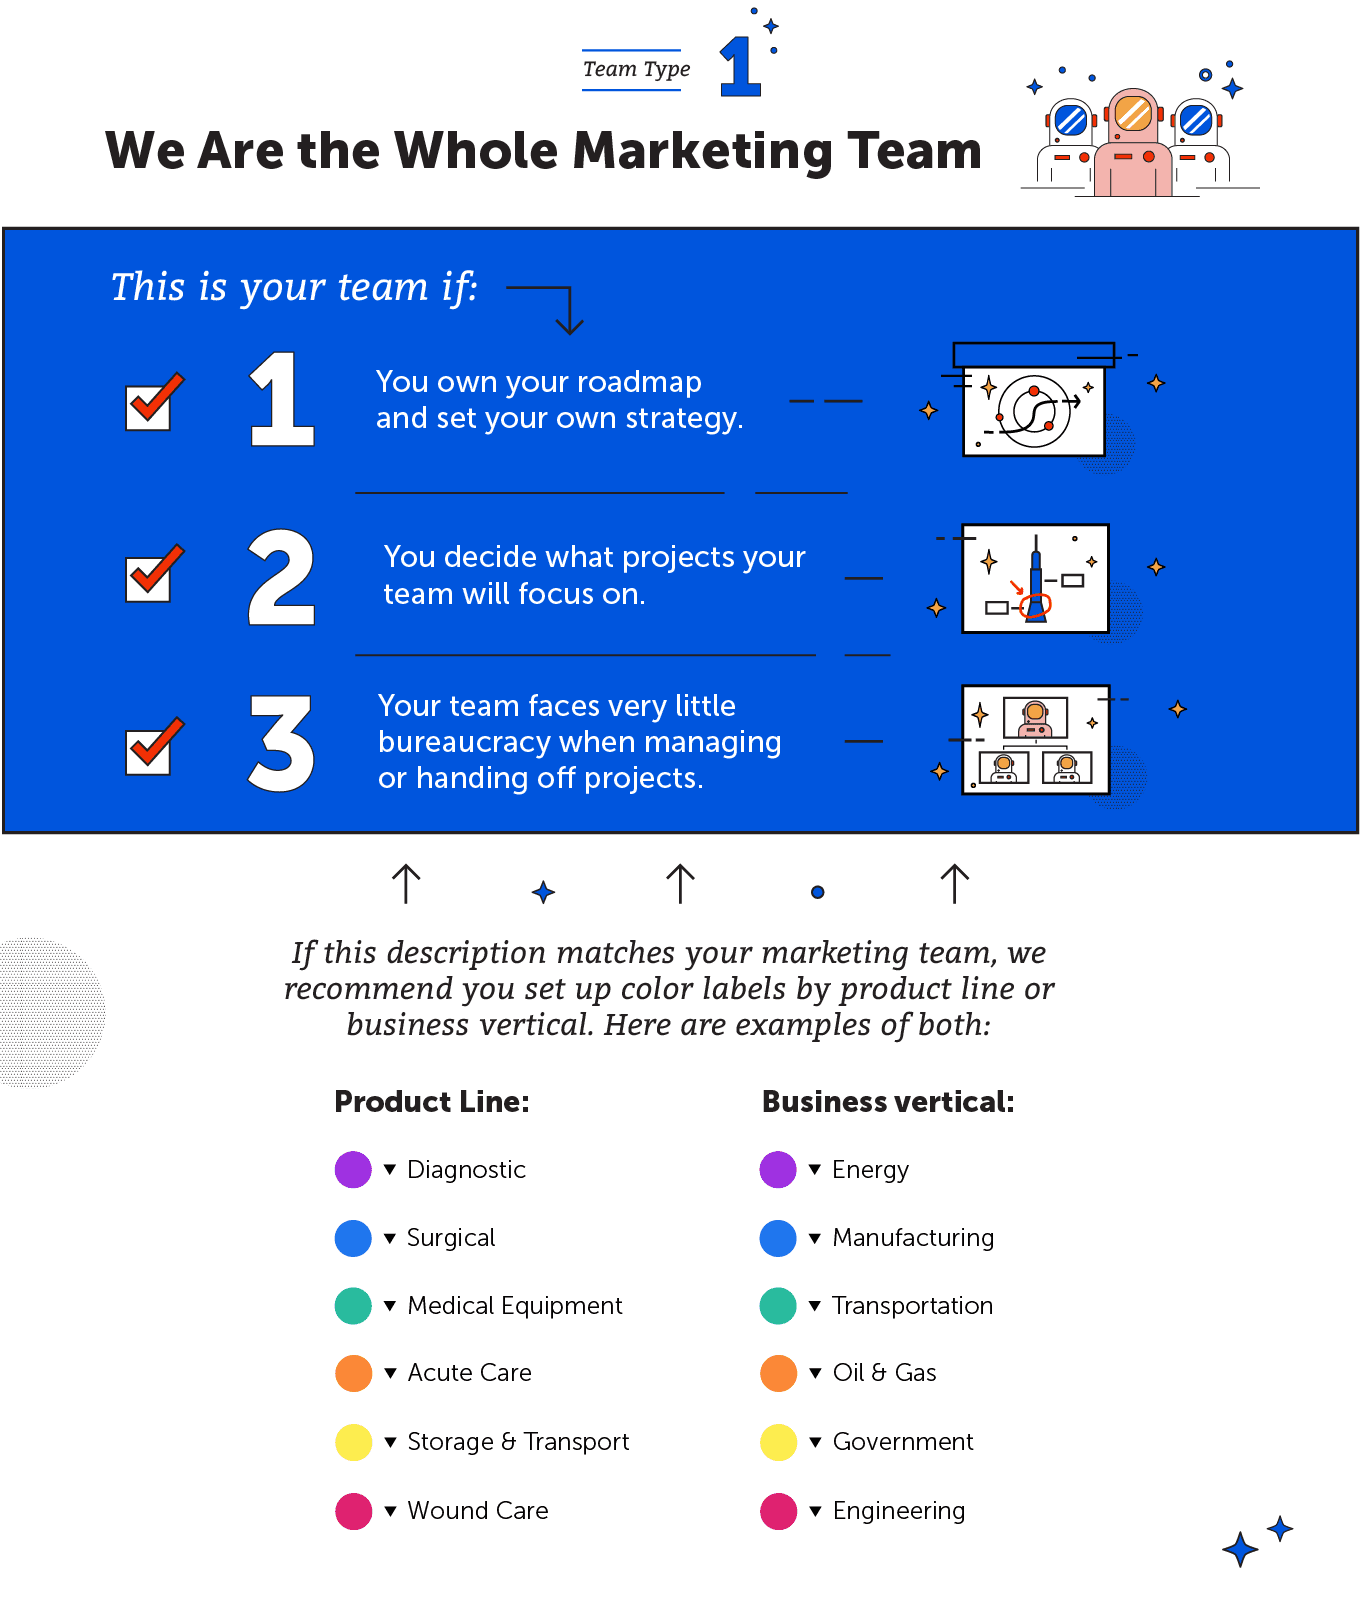 We are the whole marketing team